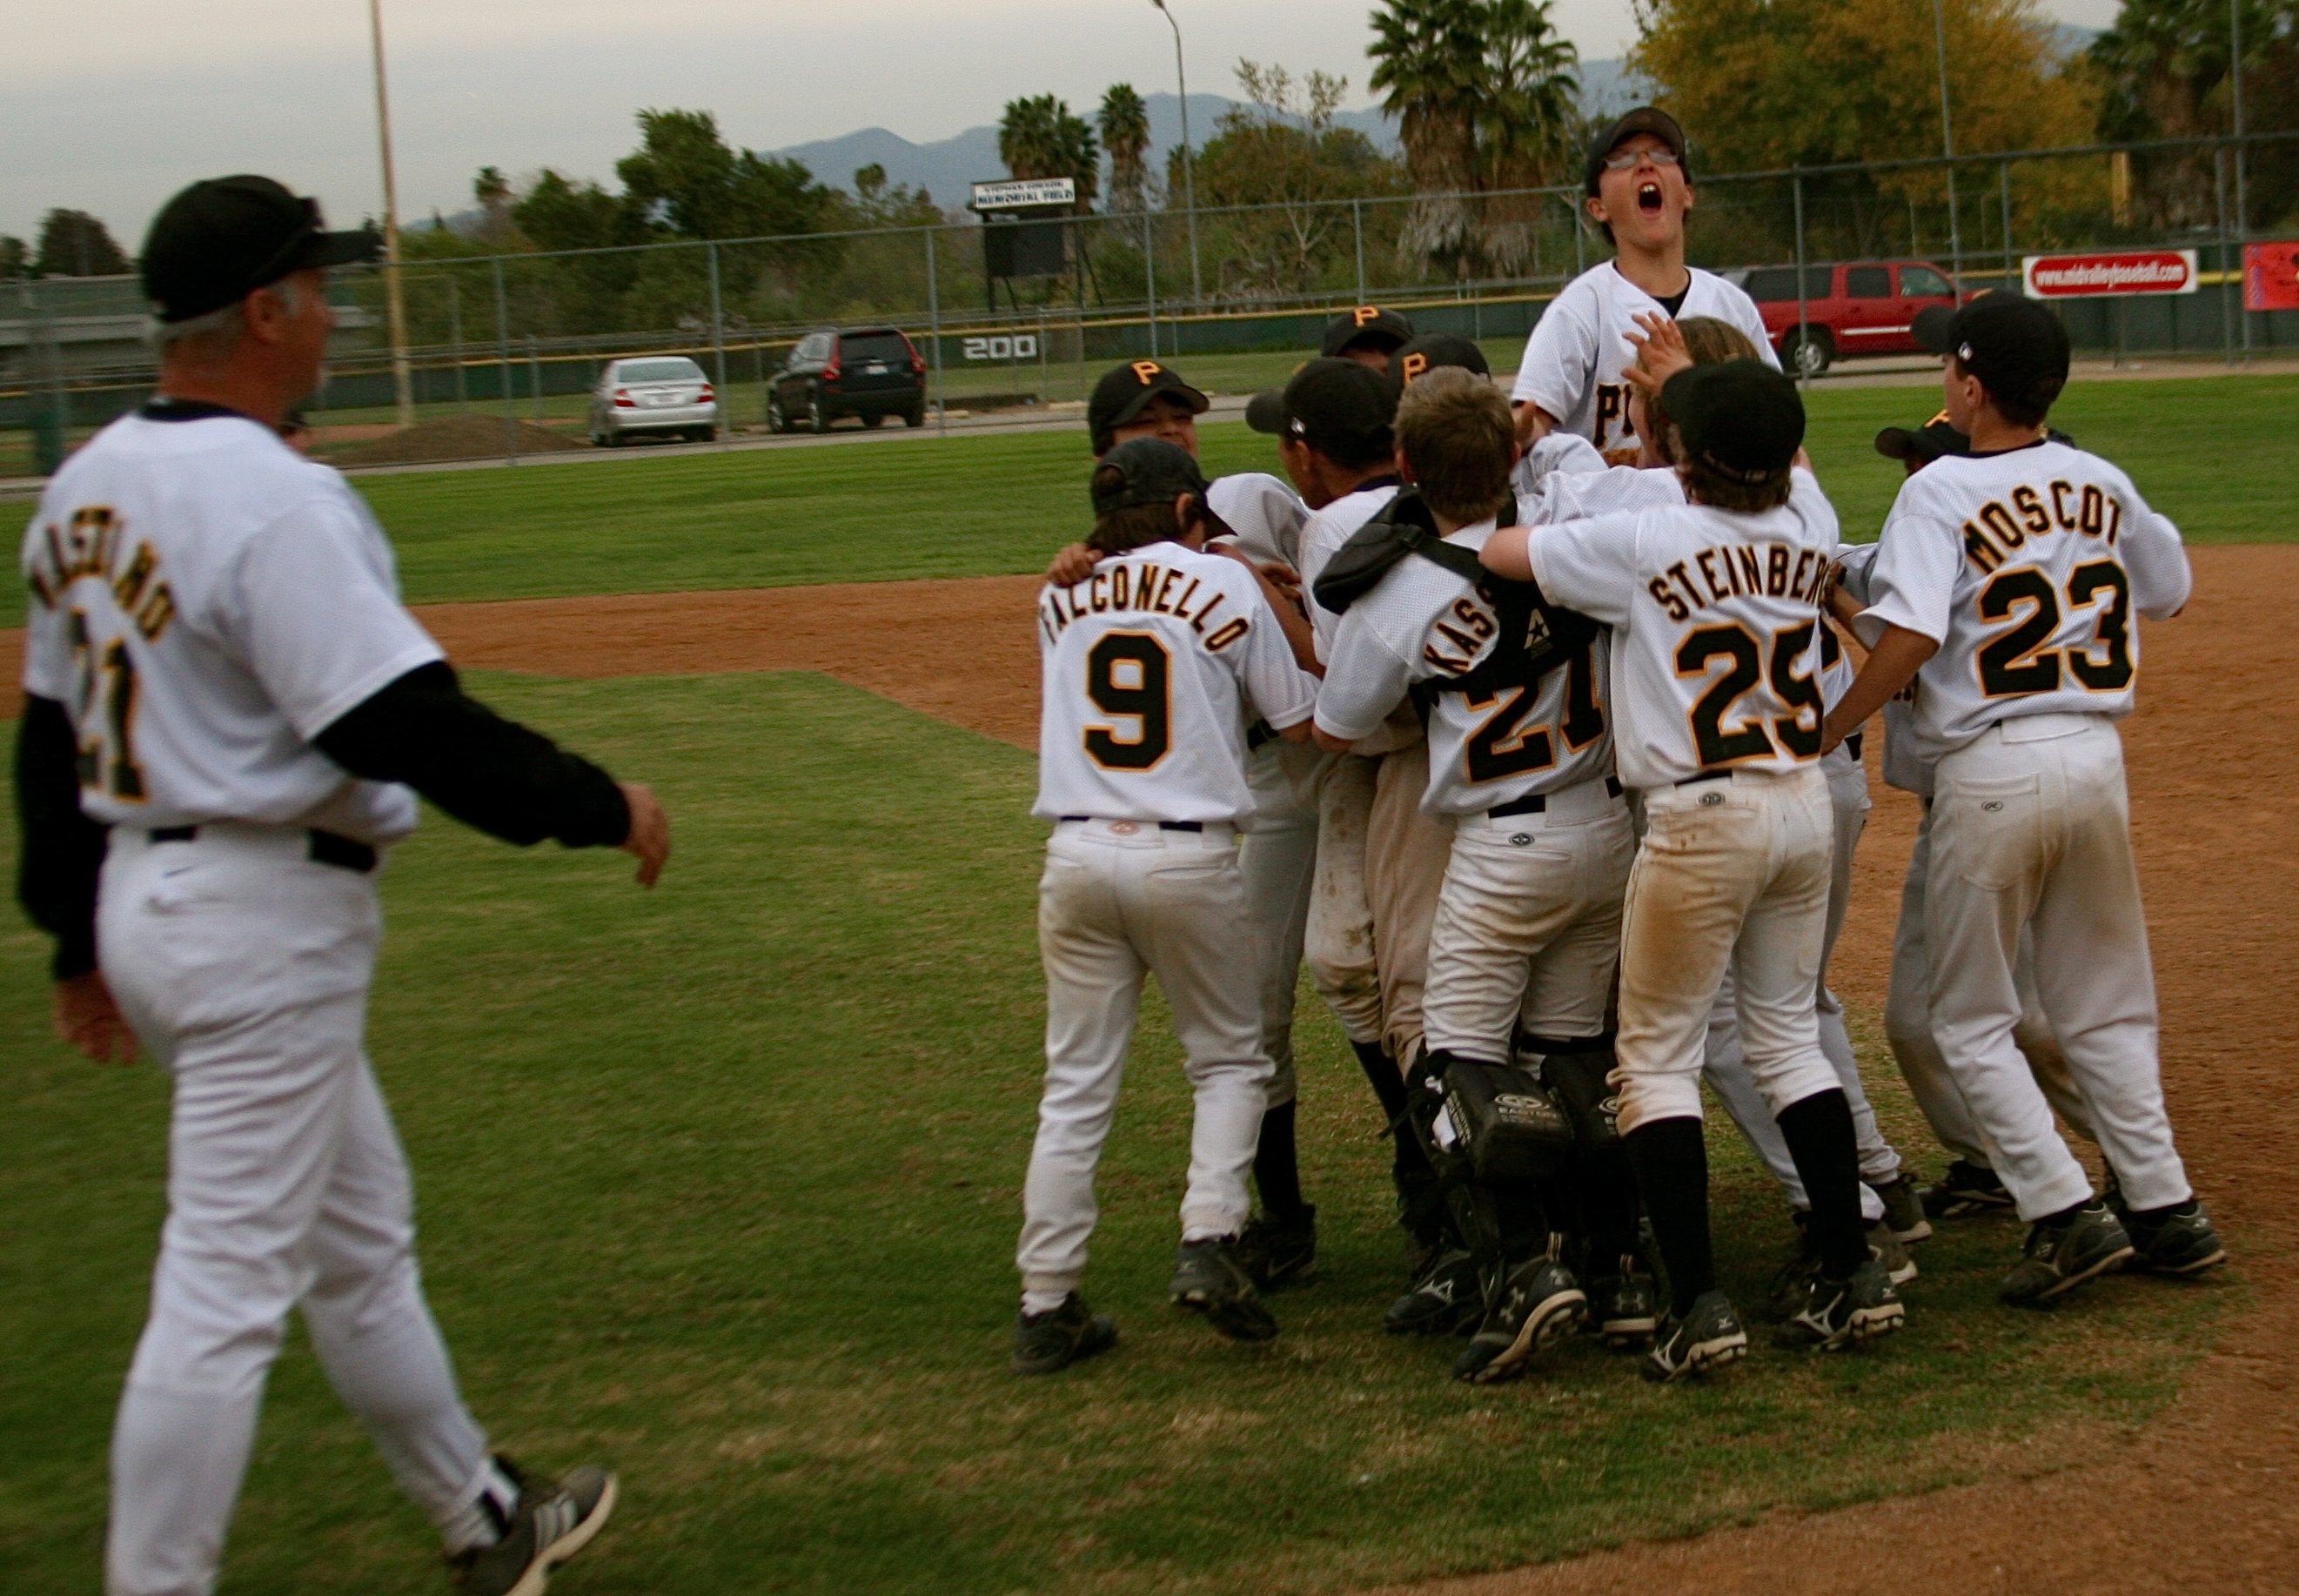 Pirates players celebrate near first base after the final out of last Sunday's Mid-Valley Gobbler championship game. Photo courtesy of Gabi Falconello